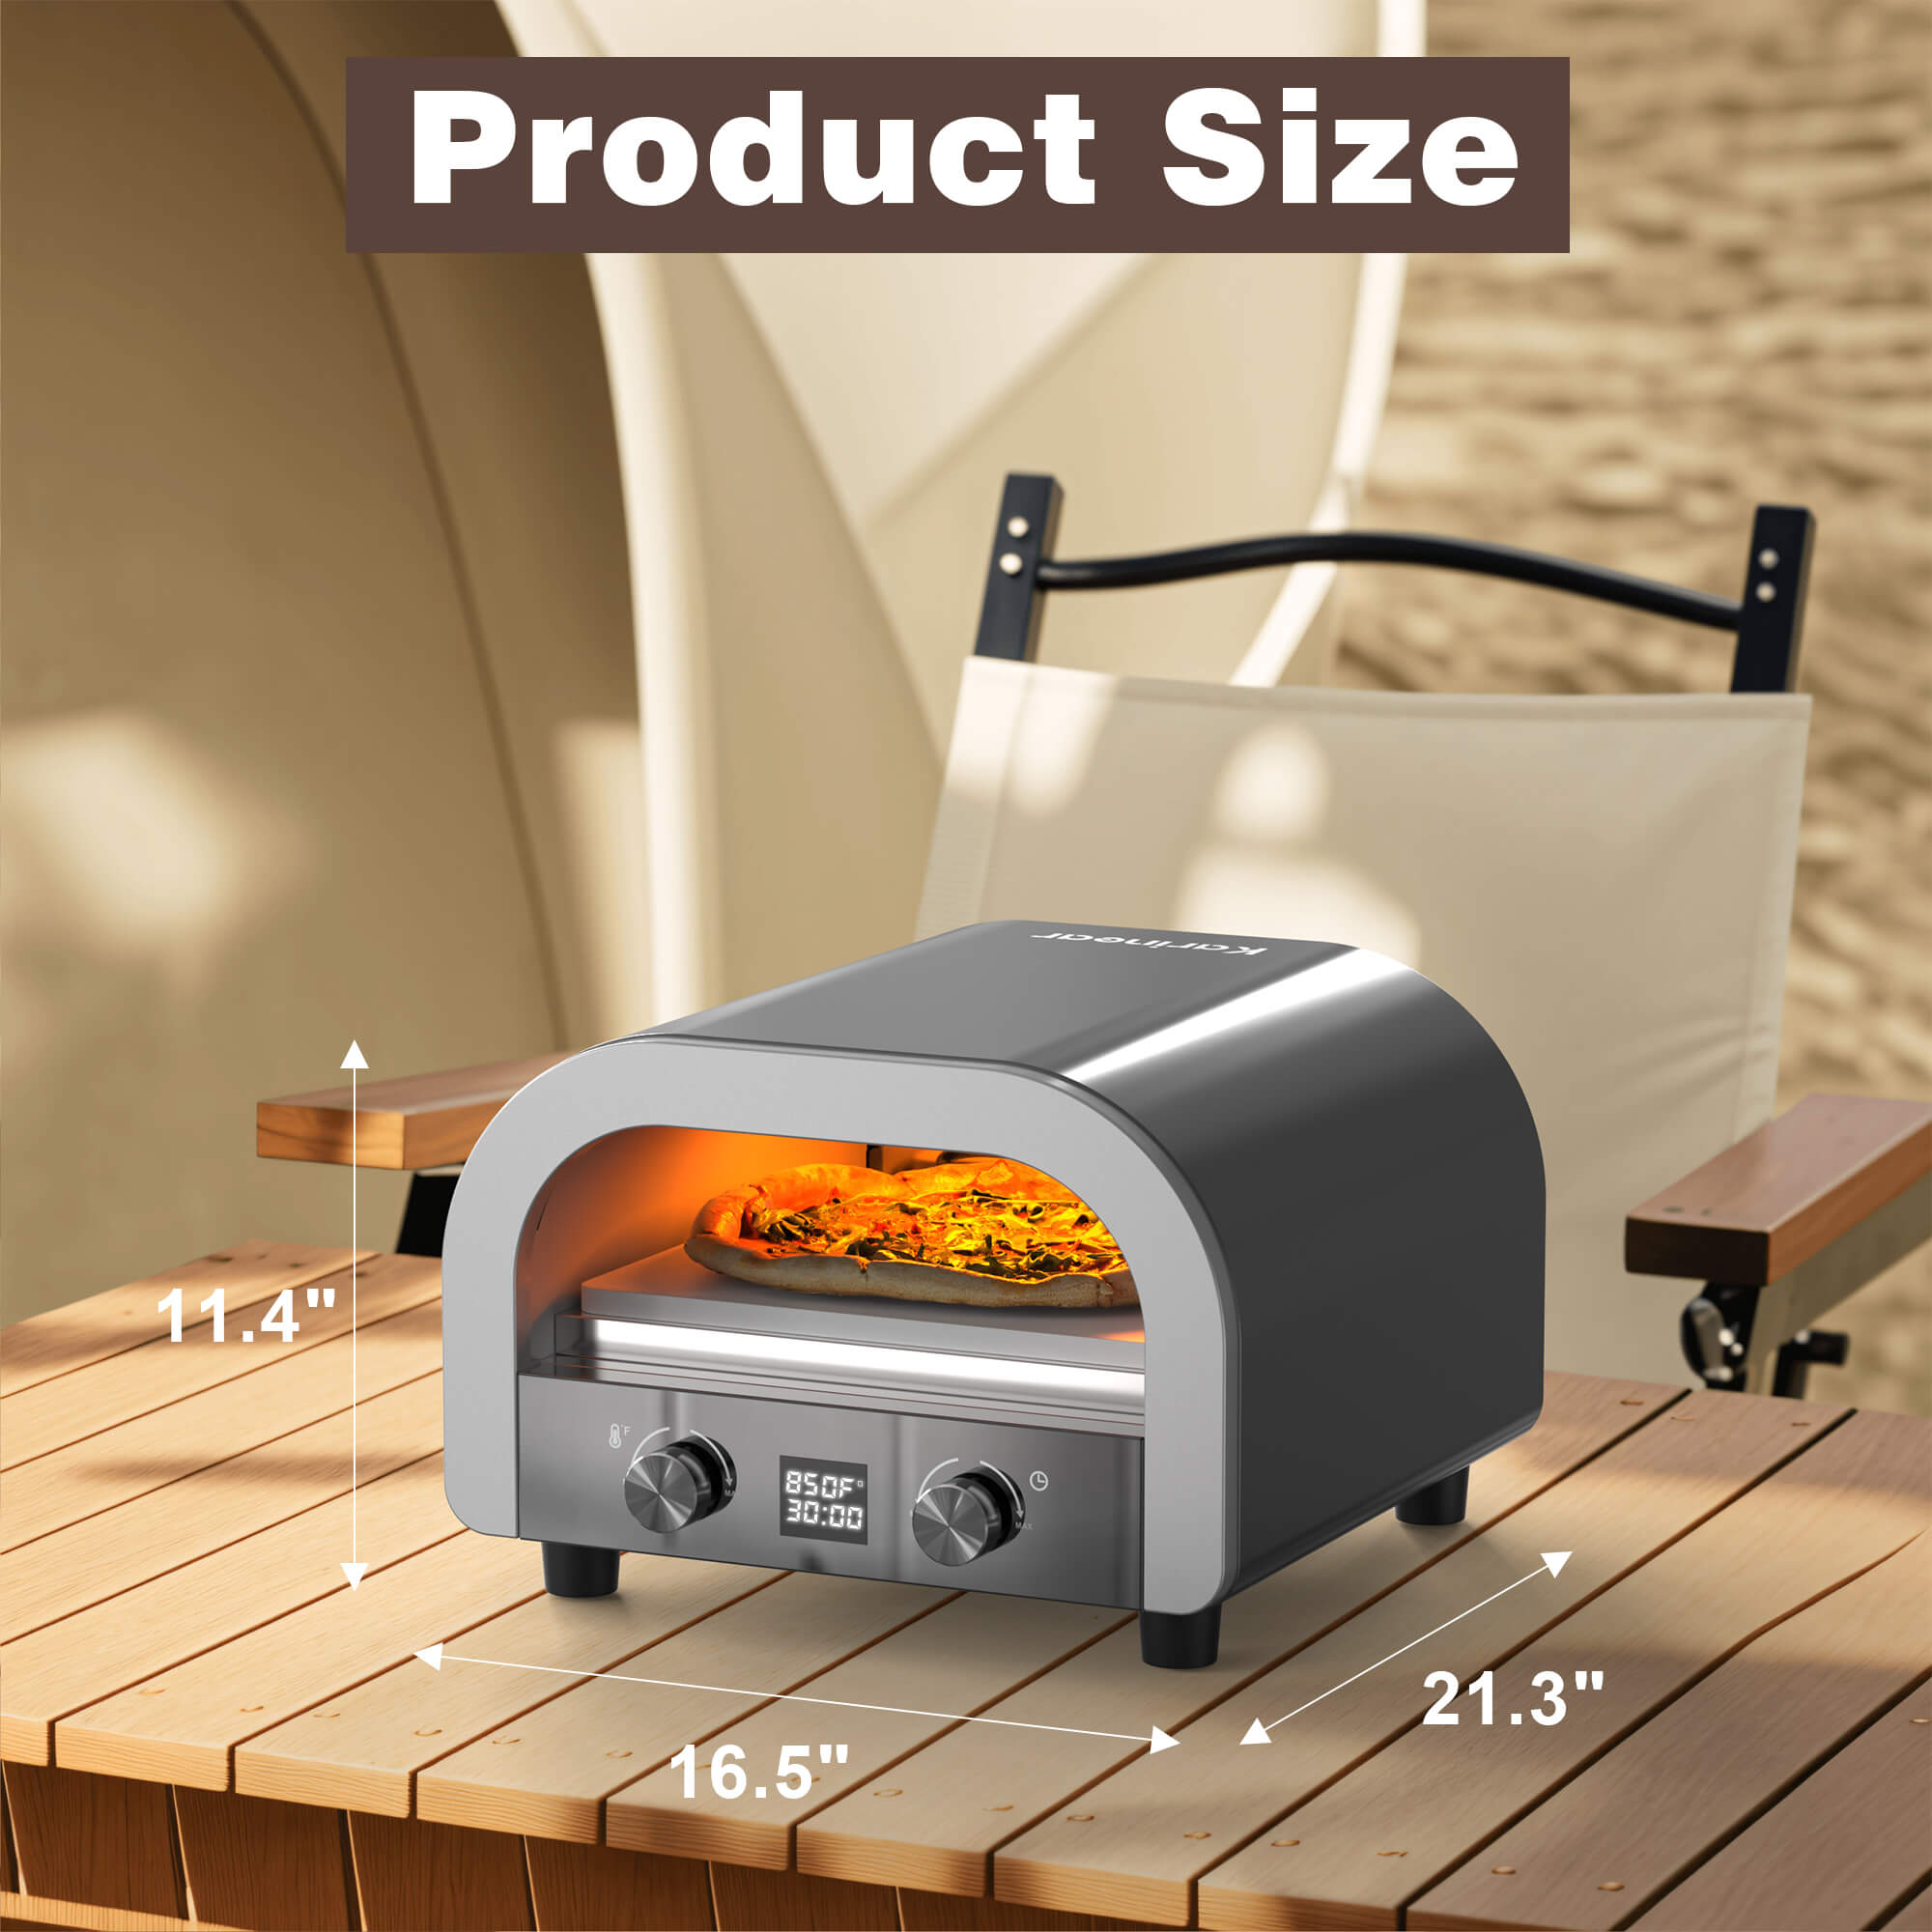 pizza in an electric oven